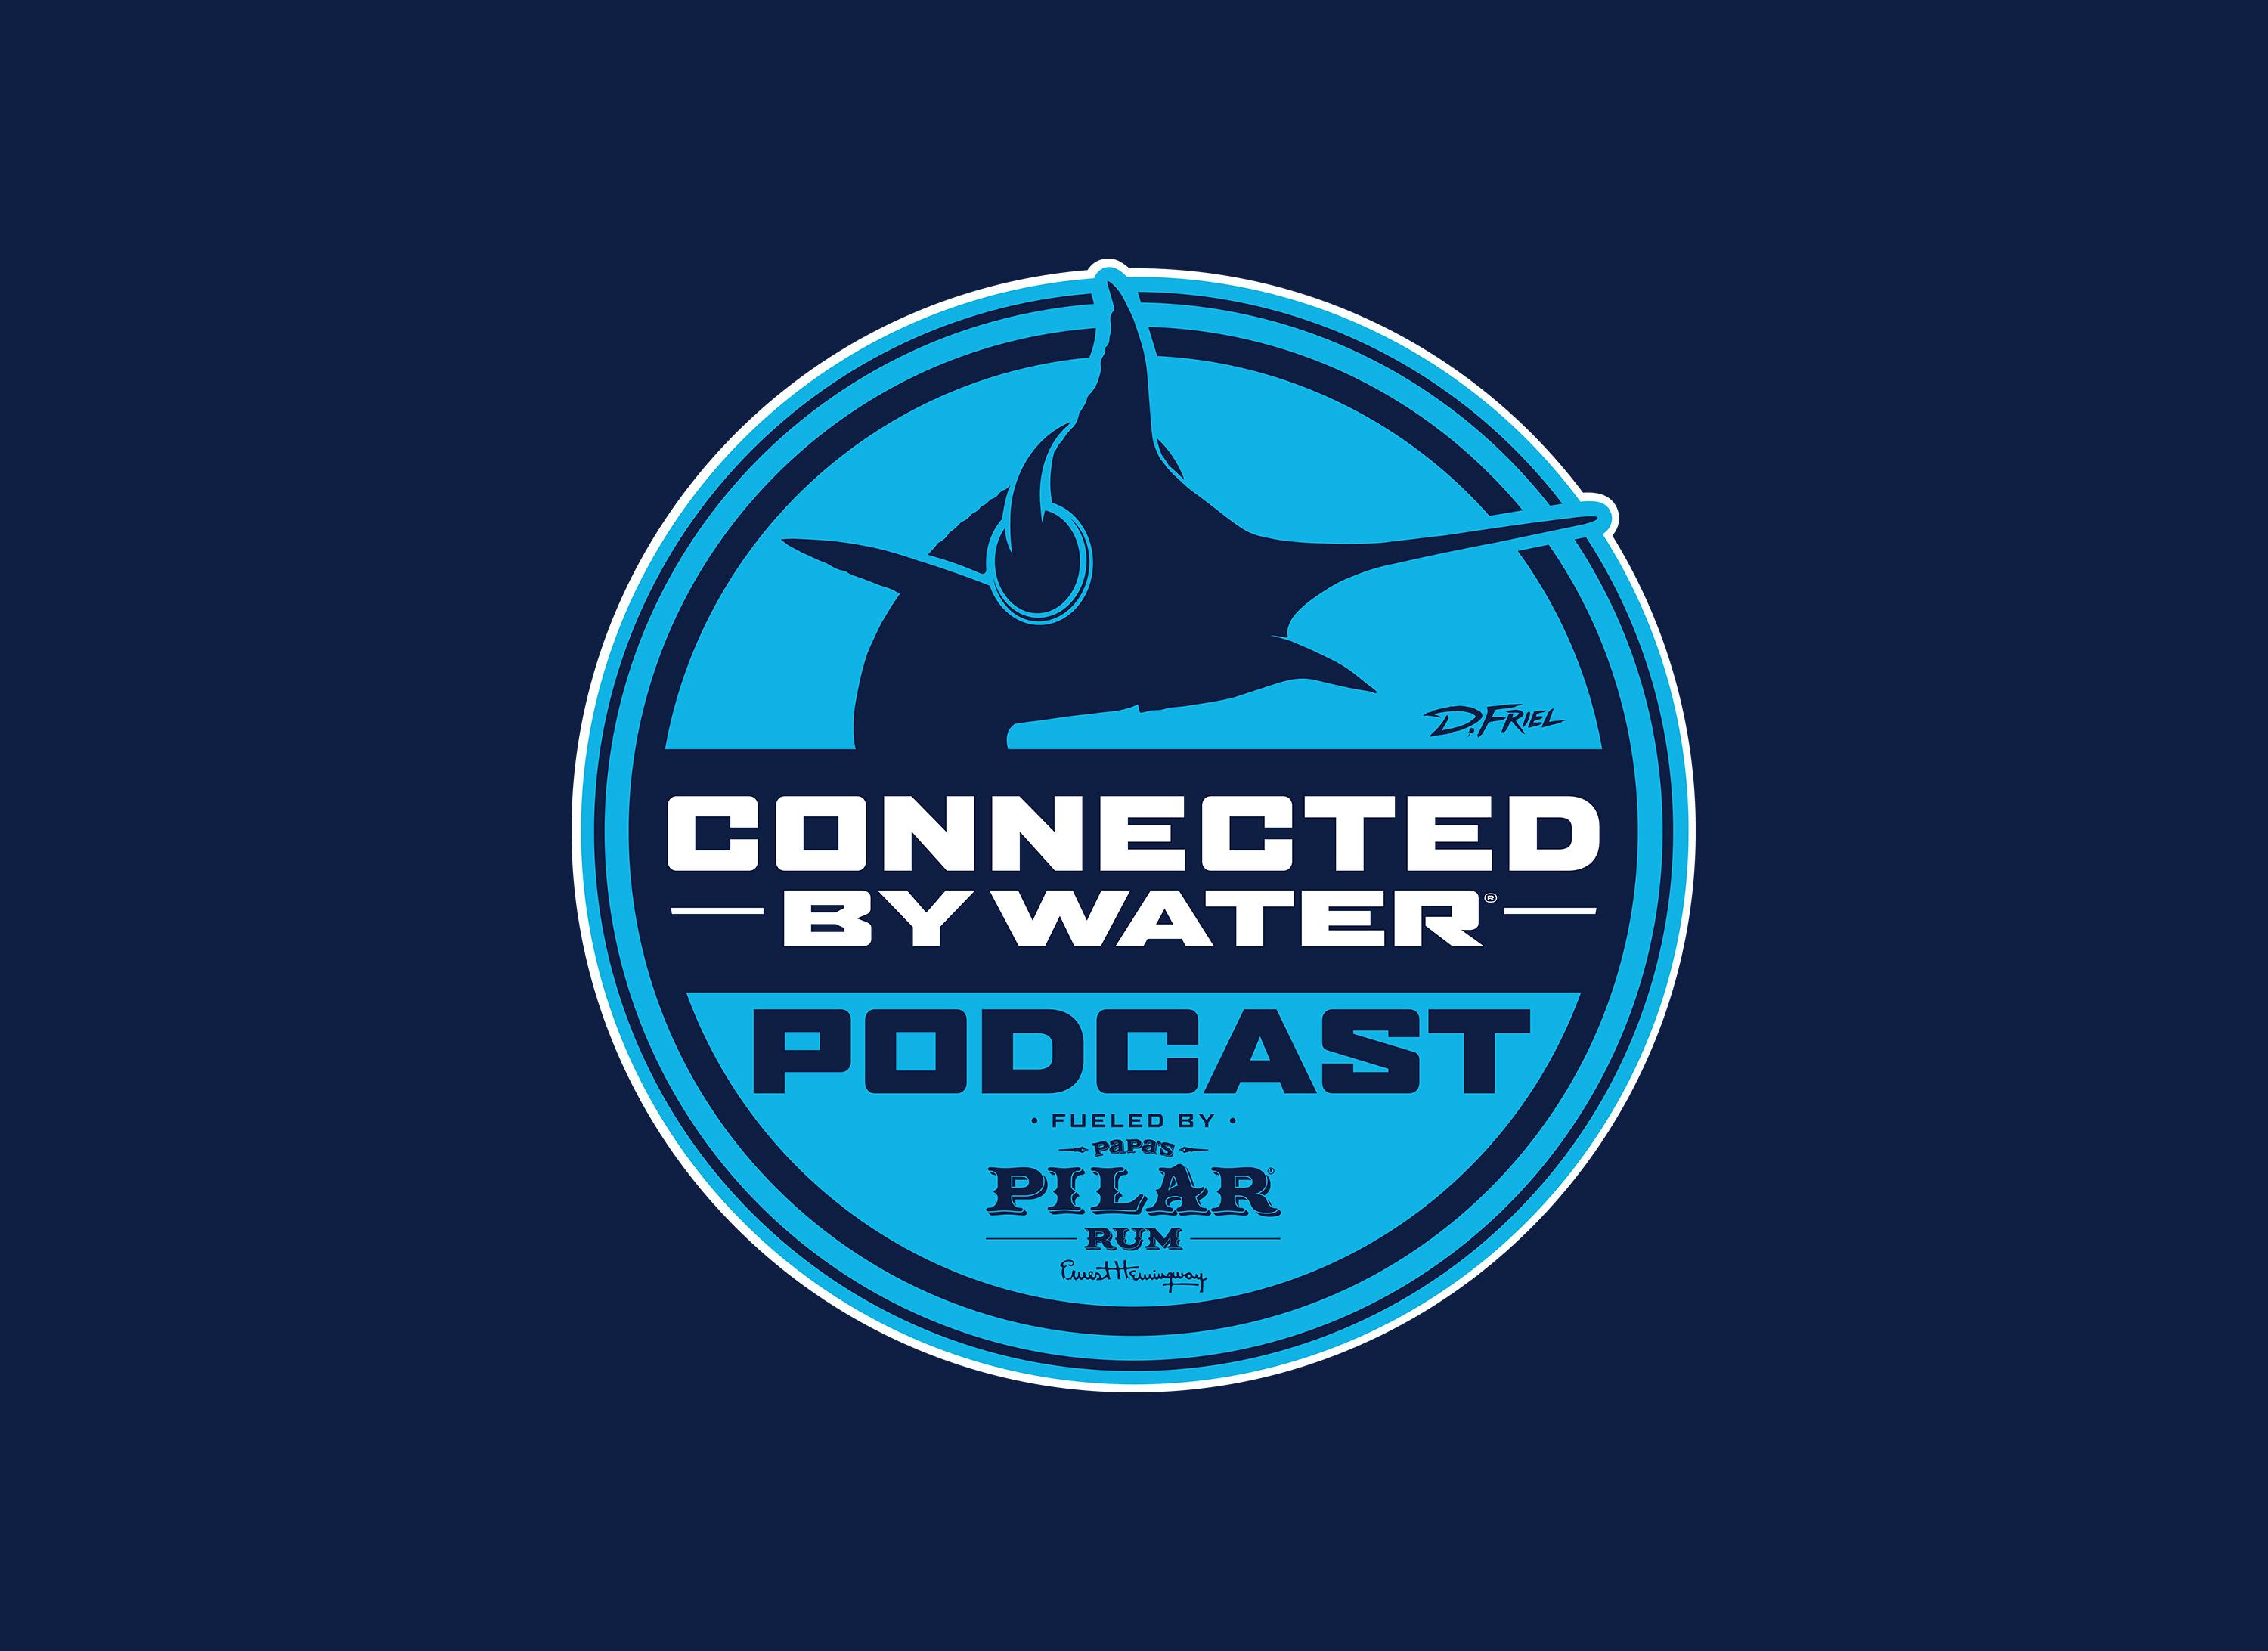 Pat Ford | Episode 175 | Connected By Water